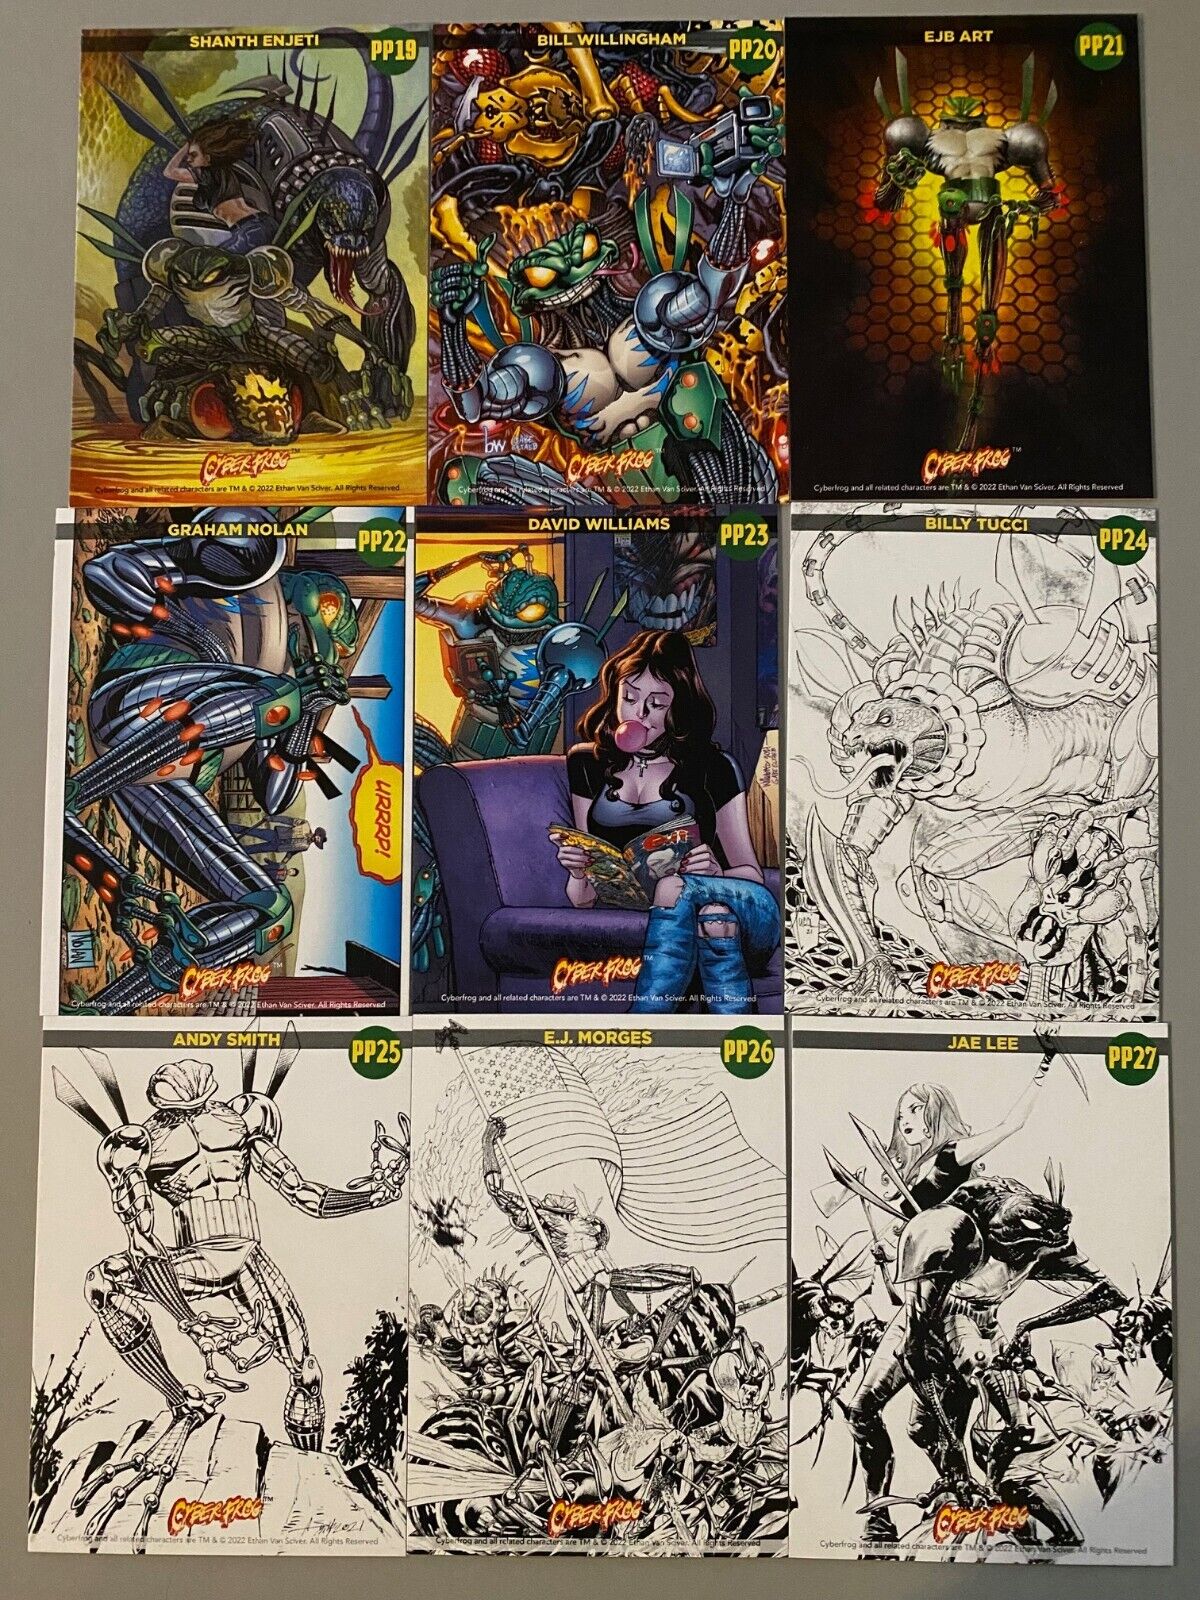 CYBERFROG PATREON PUZZLE #3 PP19-27 trading card set 9 CARDS.